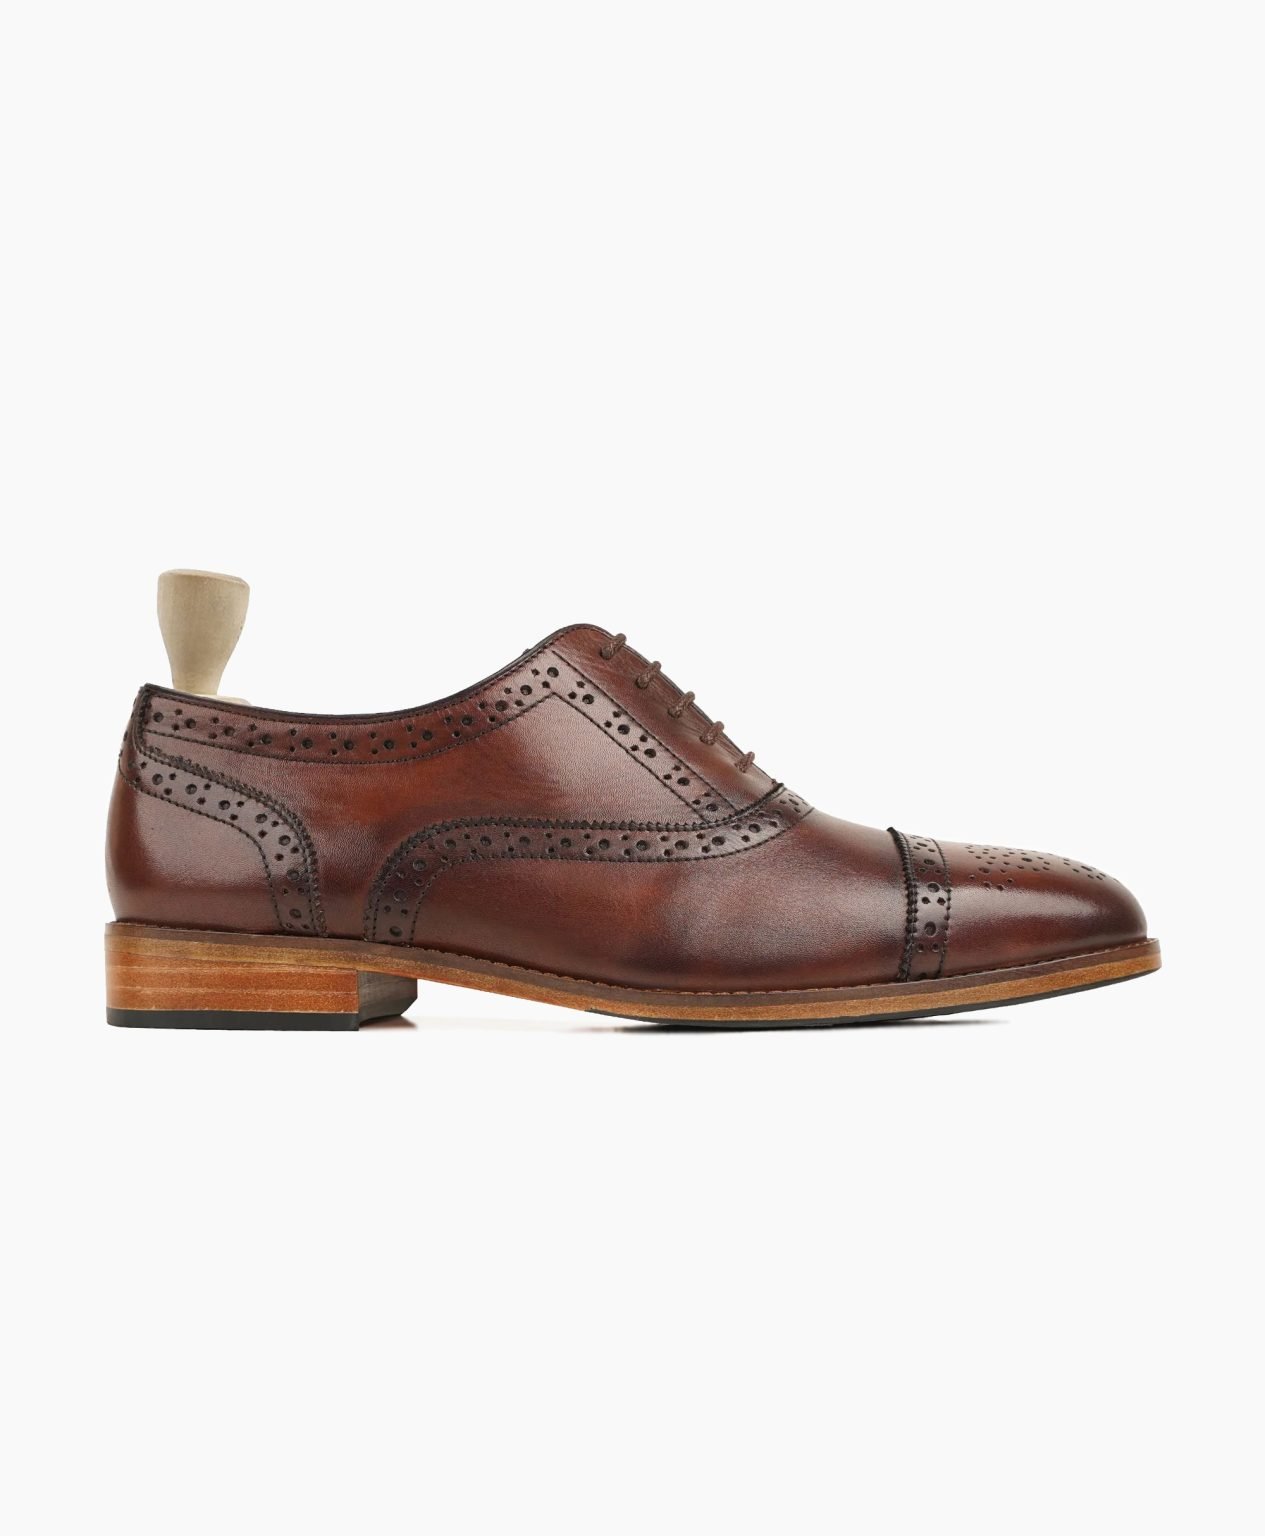 penzance-oxford-brown-leather-shoes-image201